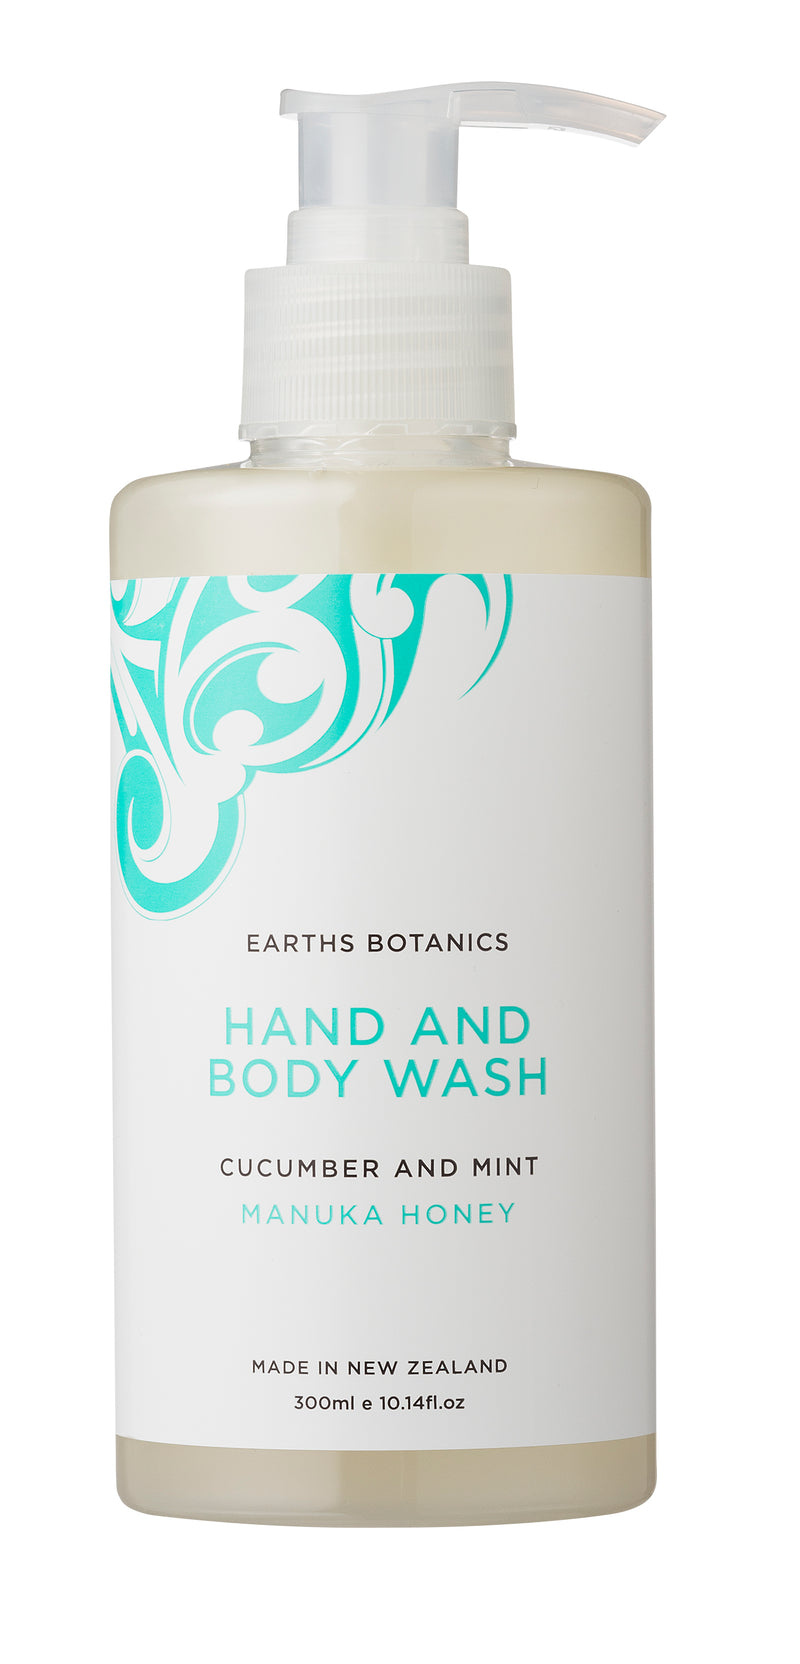 Cucumber and Mint Hand and Body Wash